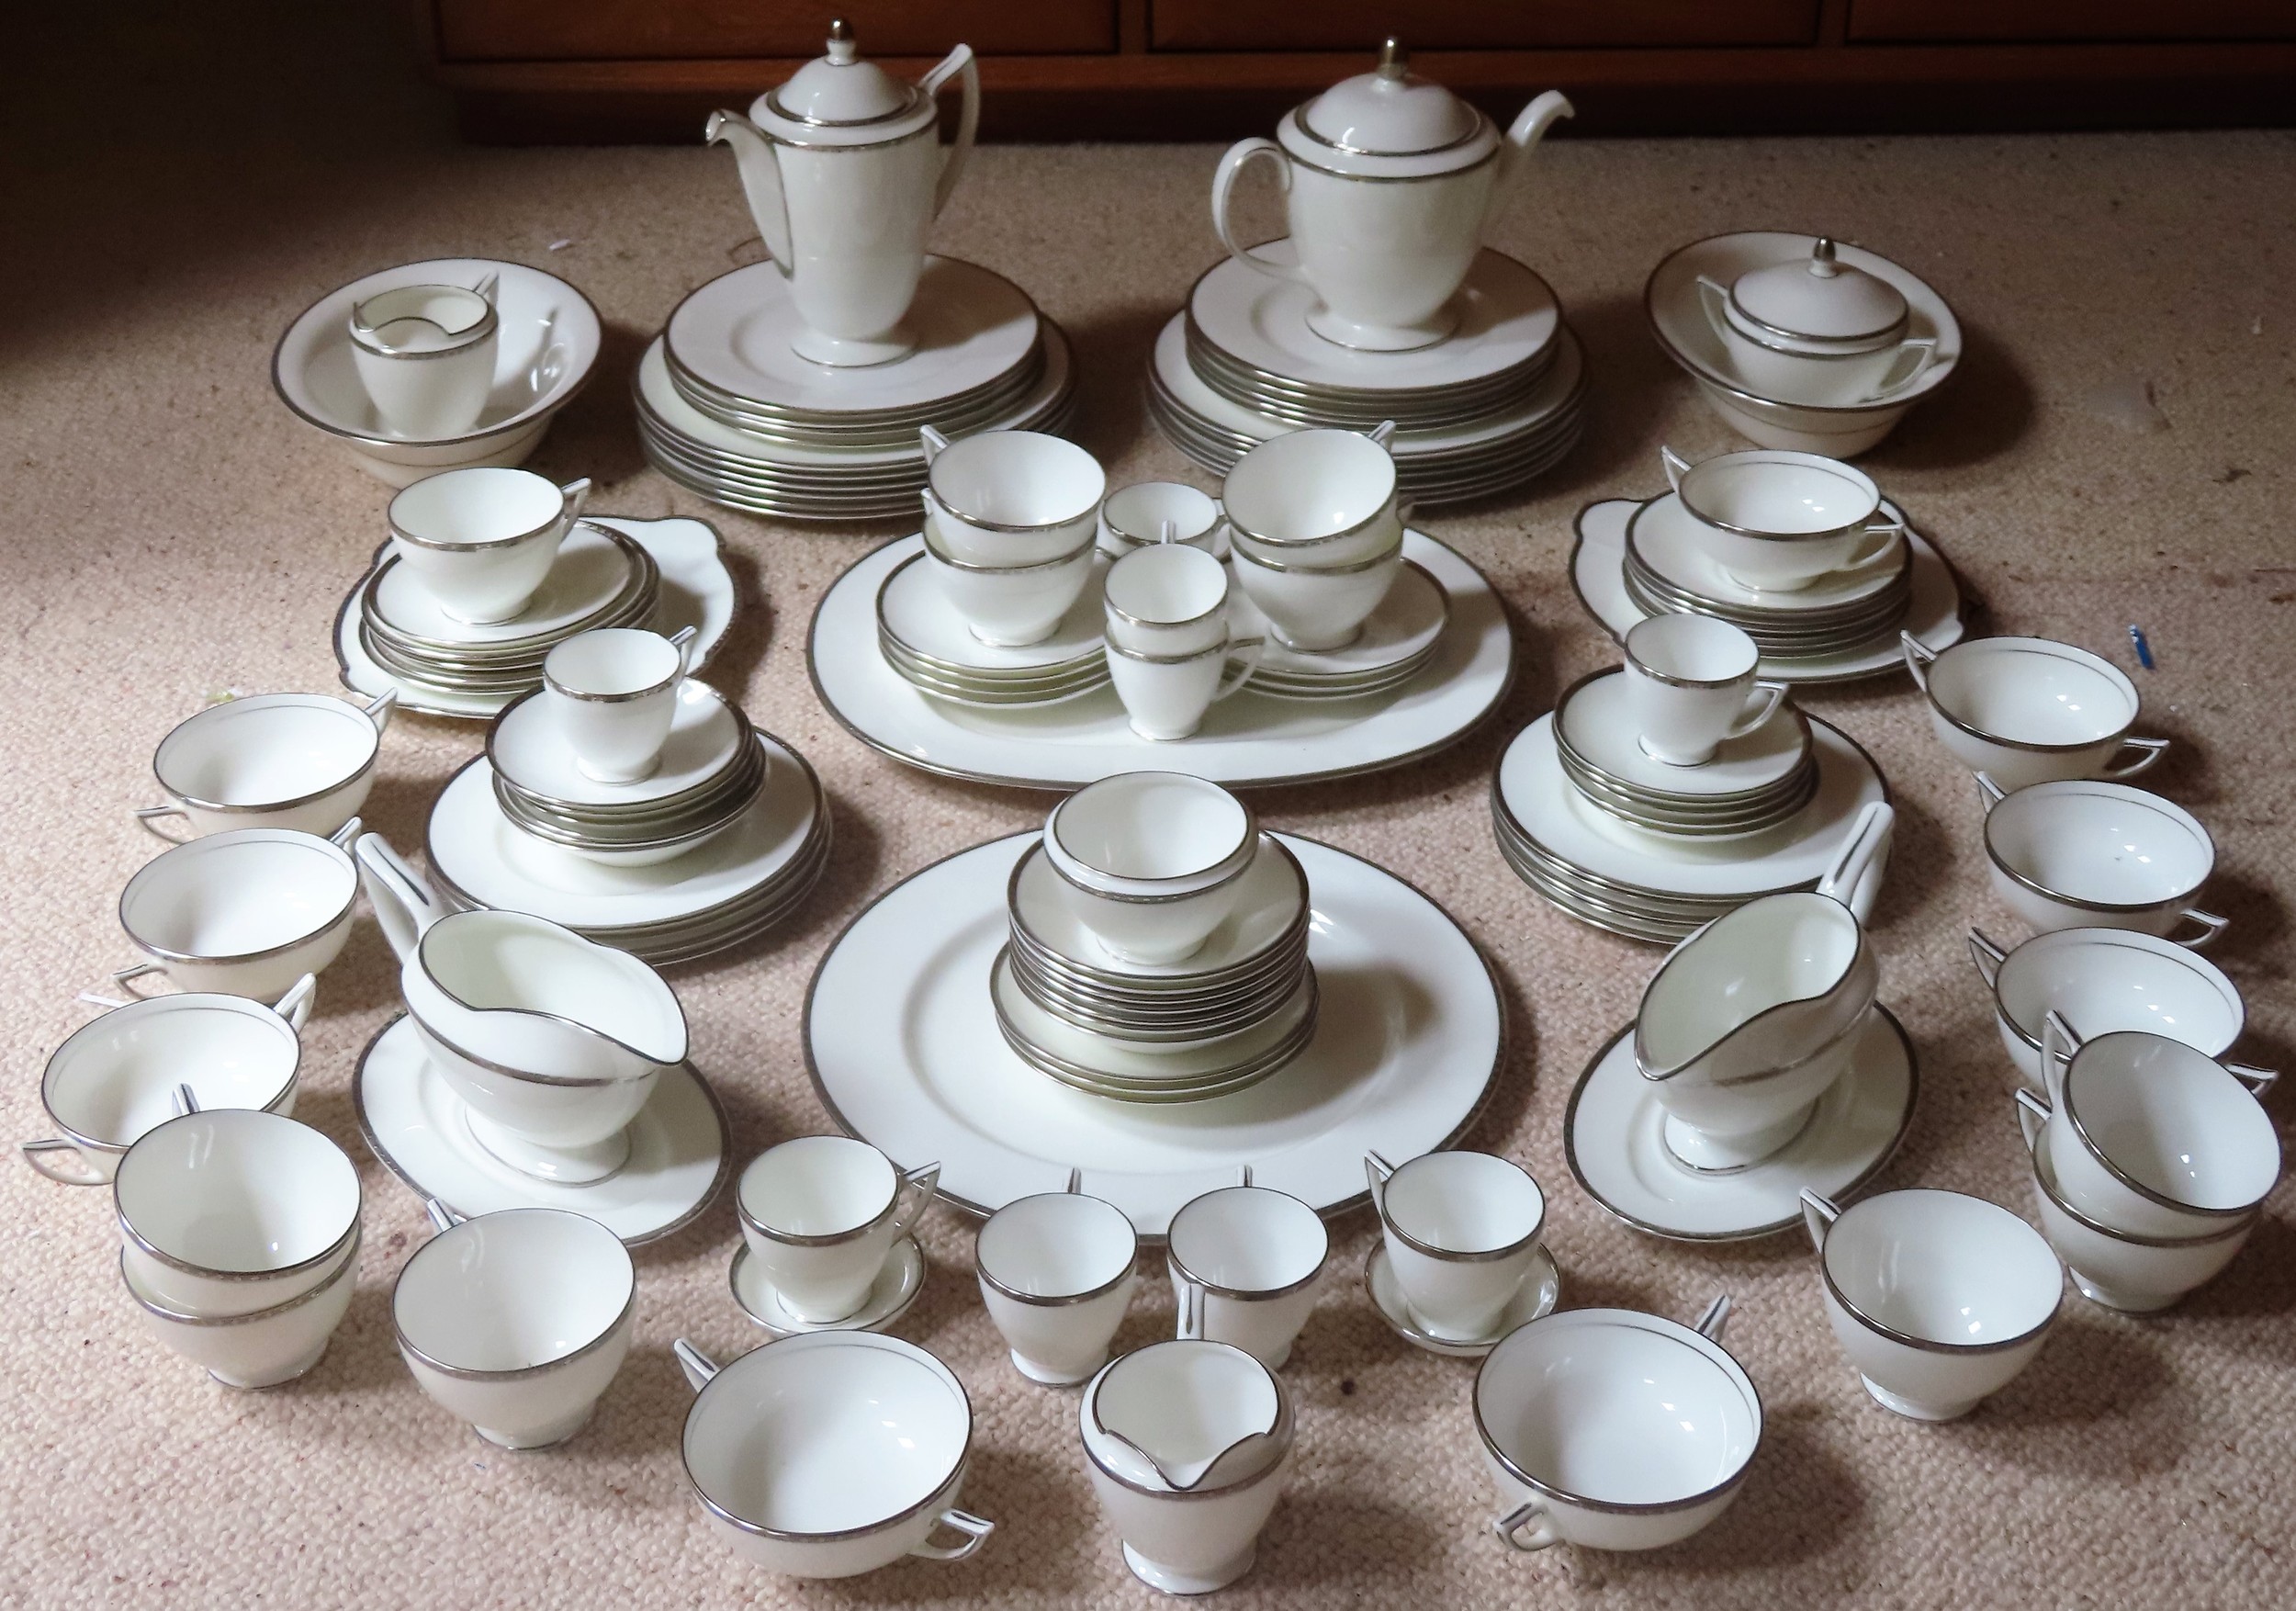 Large quantity of Minton Platinum Heritage dinnerware. App. 110+ pieces All appears in reasonable